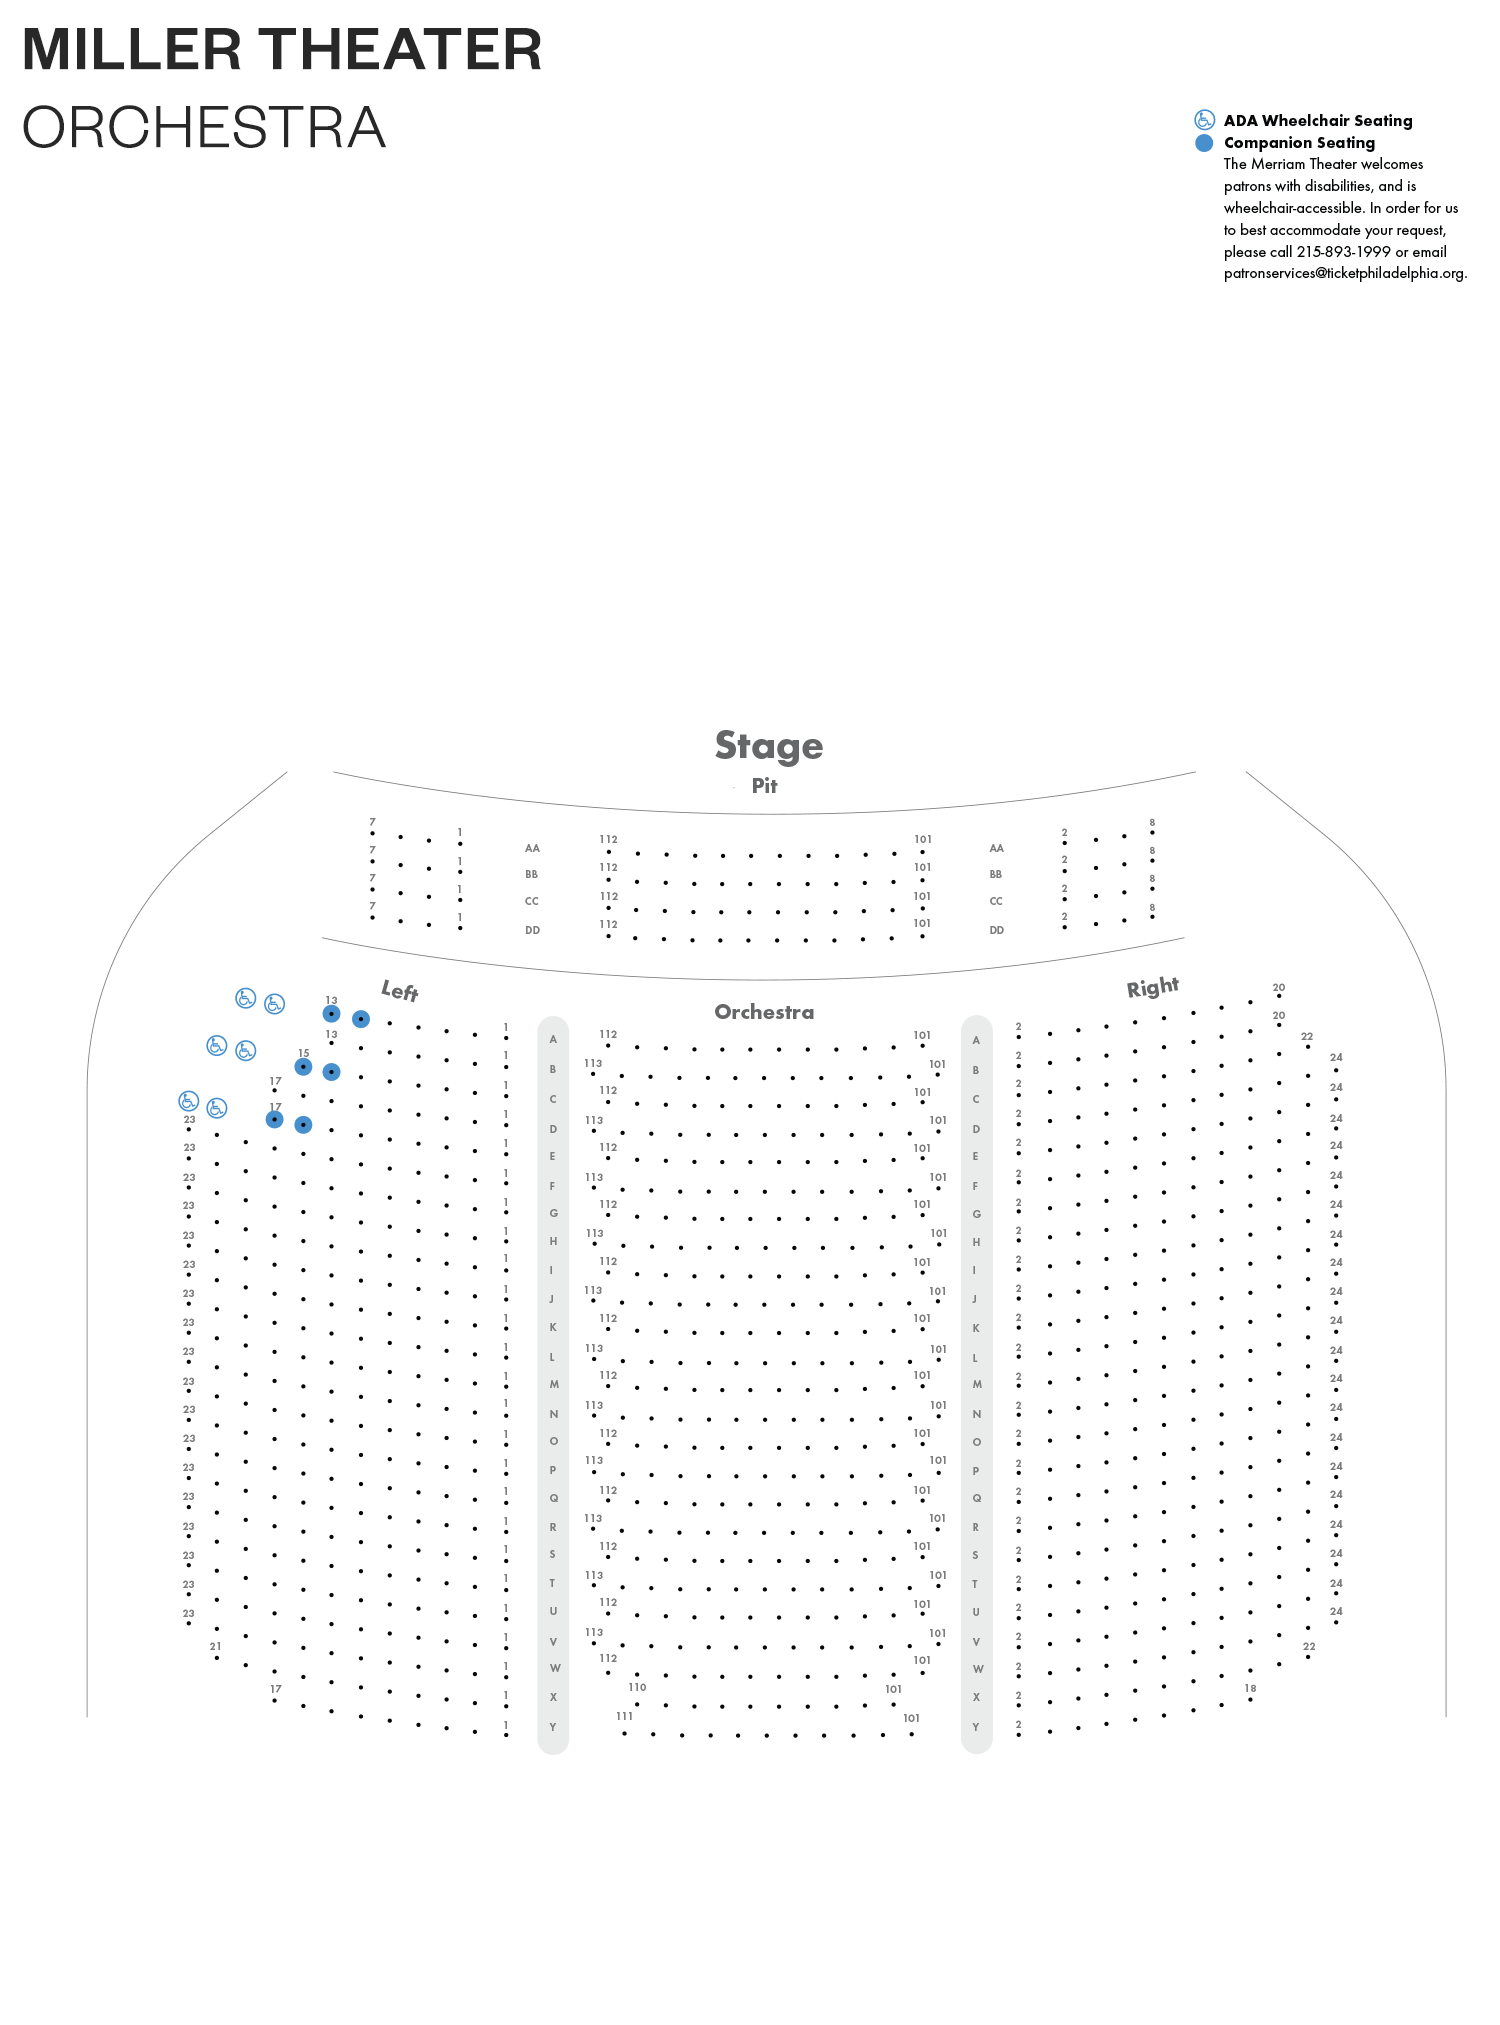 Miller Theater - Orchestra - Seating Chart